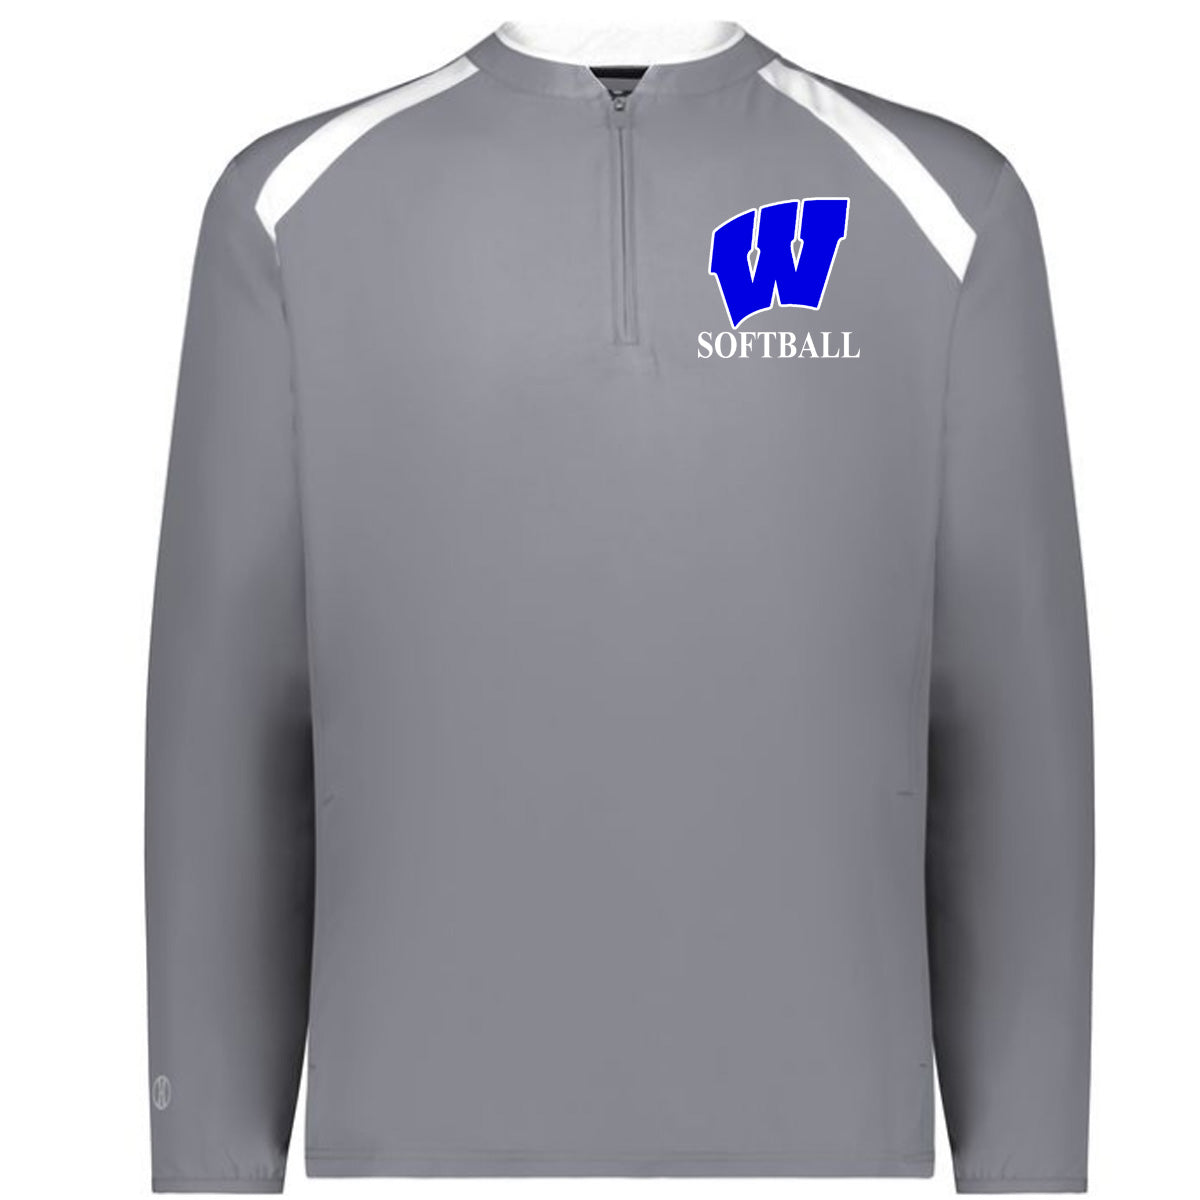 Windsor - Clubhouse Longsleeves Cage Jacket with W Softball Logo - Grey - Southern Grace Creations